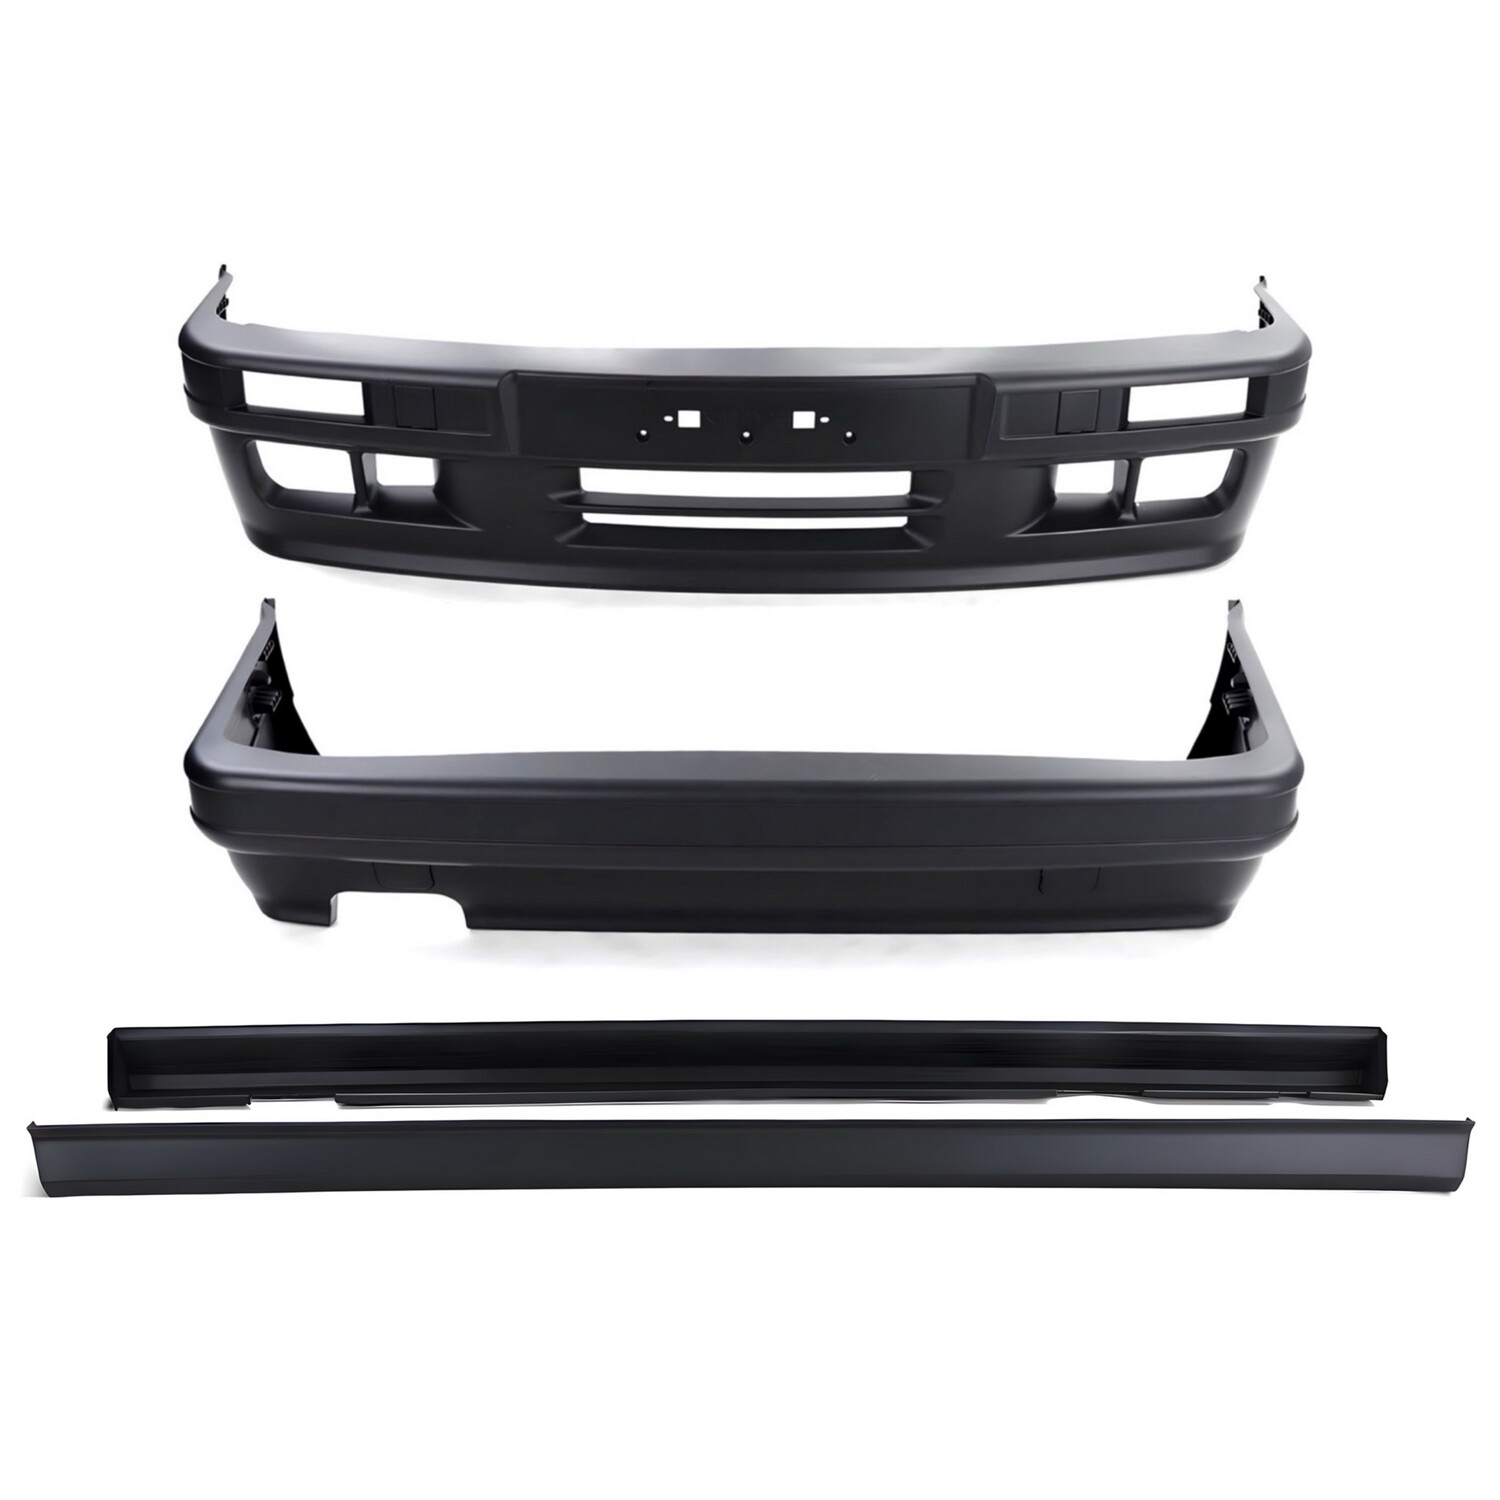 BMW E30 MTech 2 Front & Rear Bumpers + M3 Style Side Skirts